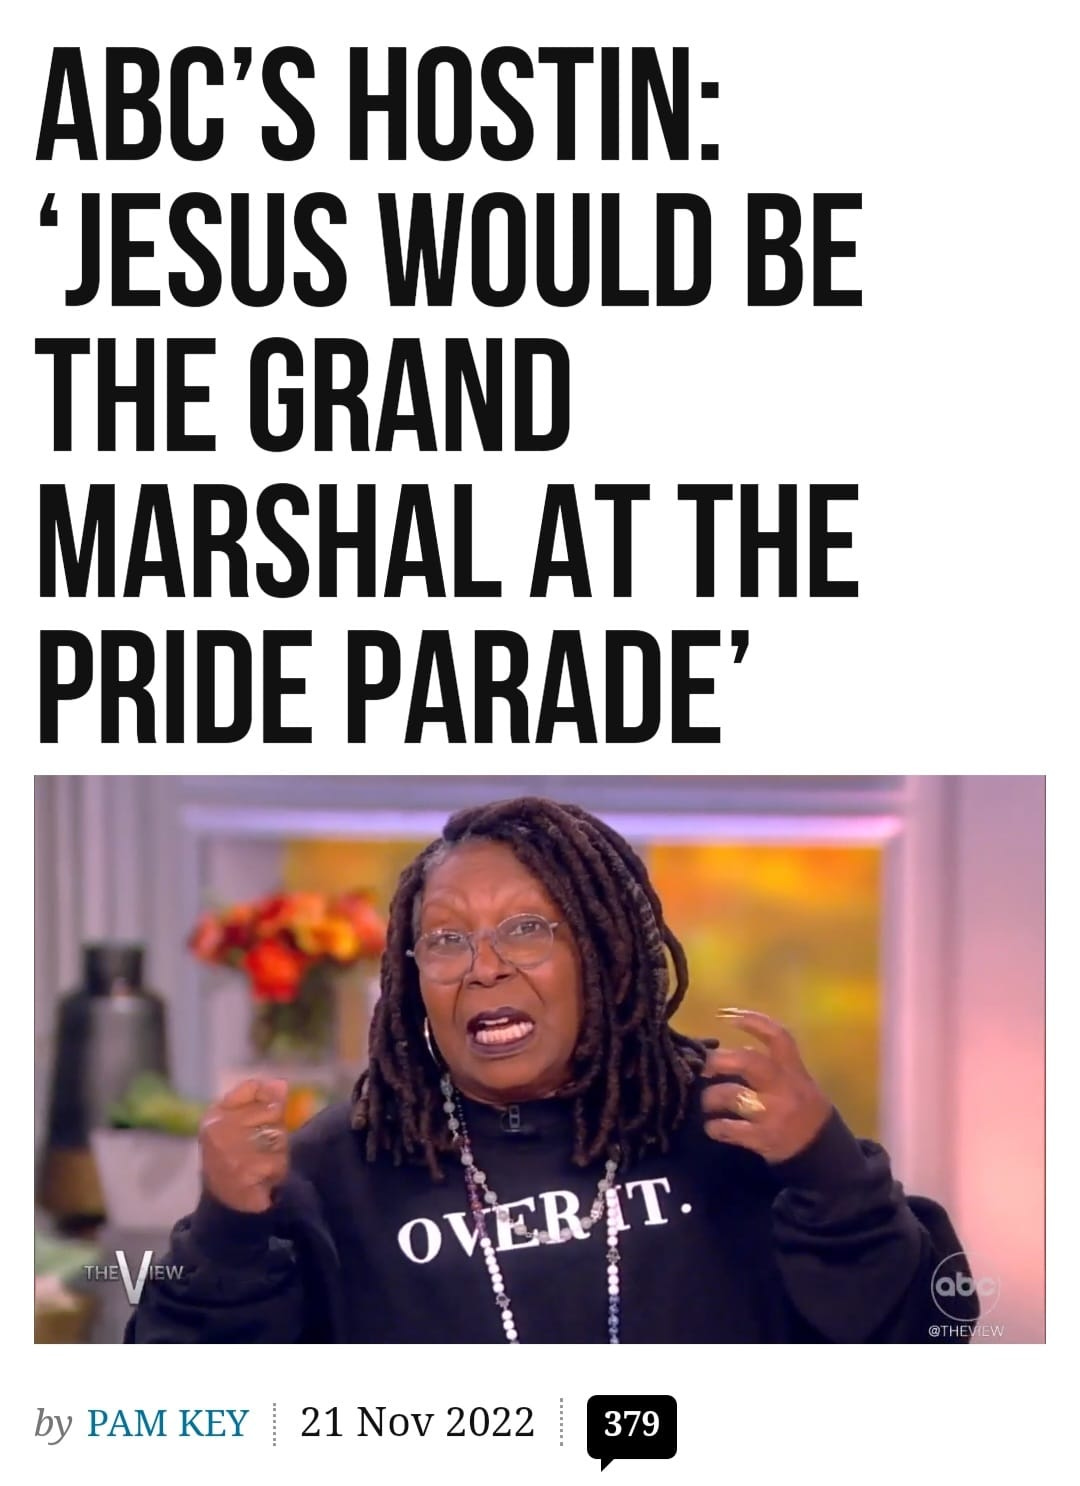 May be an image of 1 person and text that says 'ABC'S HOSTIN: JESUS WOULD BE THE GRAND MARSHAL AT THE PRIDE PARADE' HEVIEW OWERIT. by PAM KEY abc) ab @THEVIEW 21 Nov 2022 379'